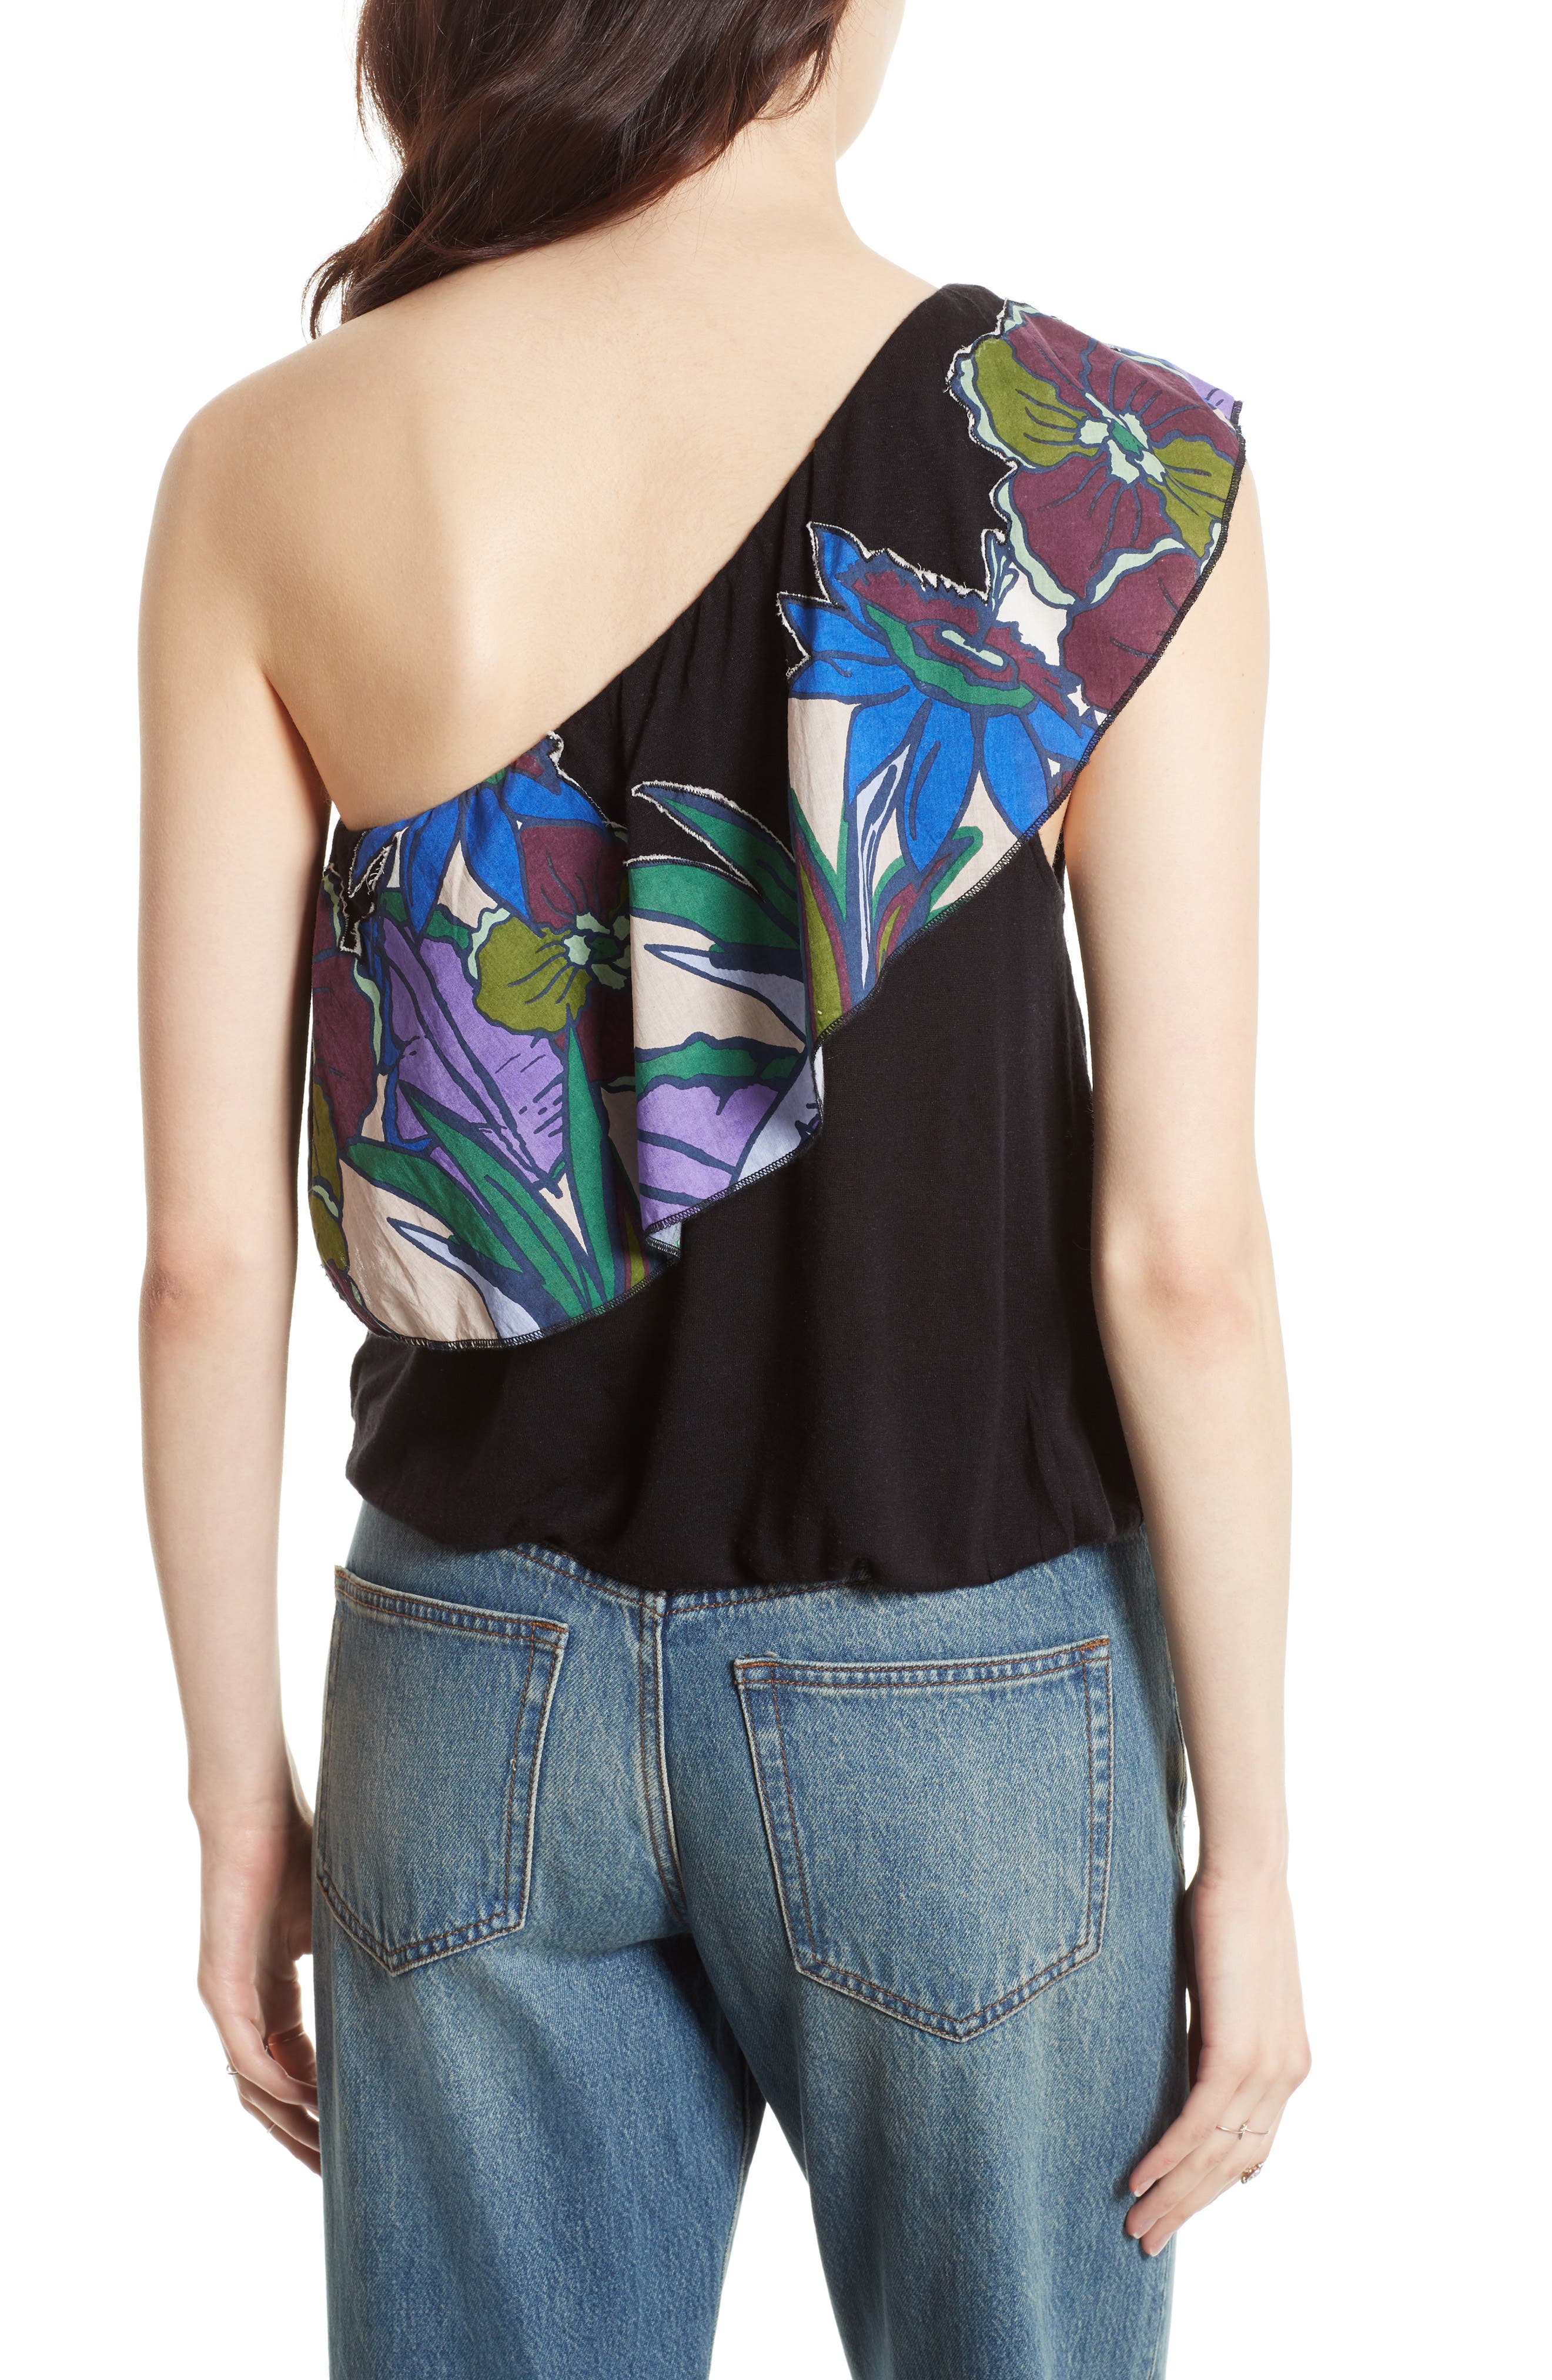 Free People Womens Annka One-Shoulder Floral Casual Black Top S